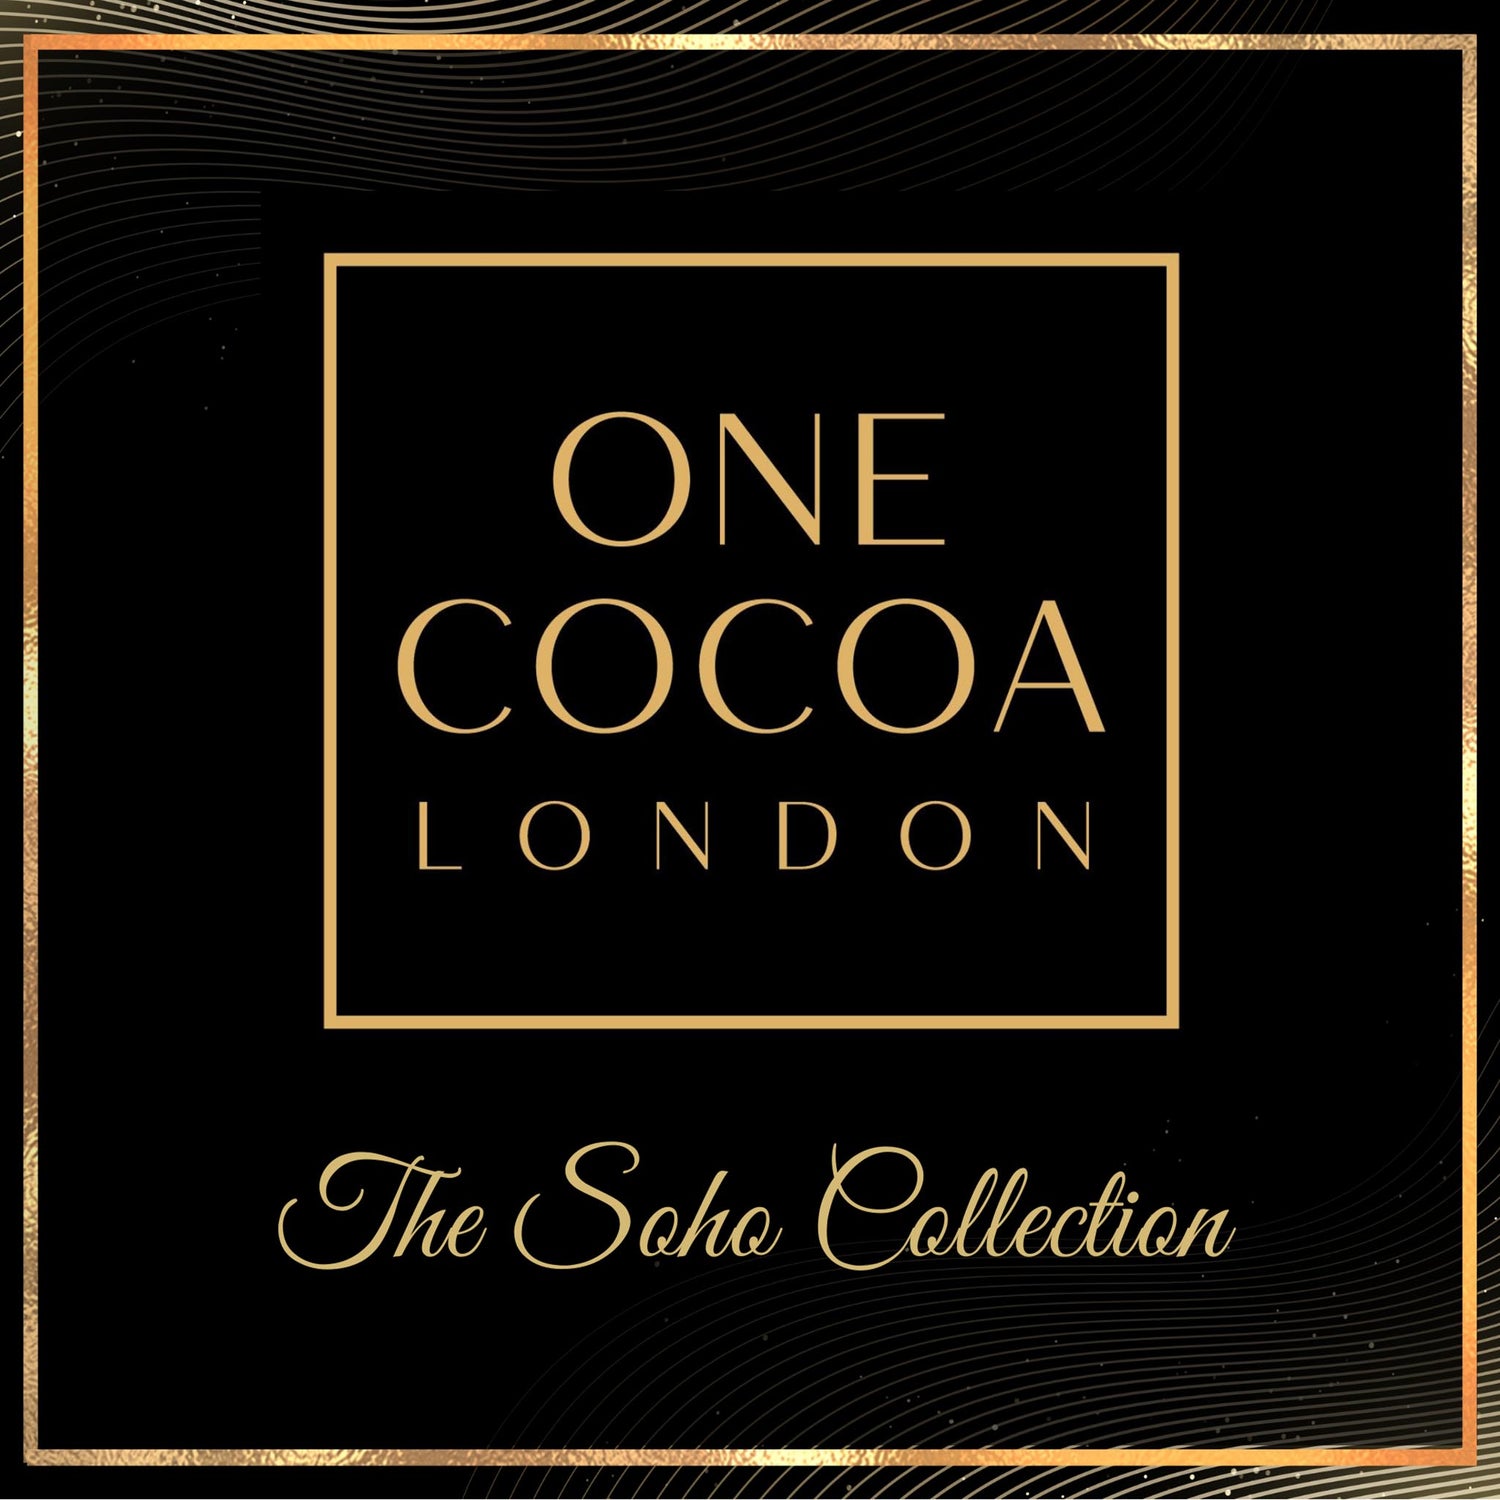 THE SOHO COLLECTION